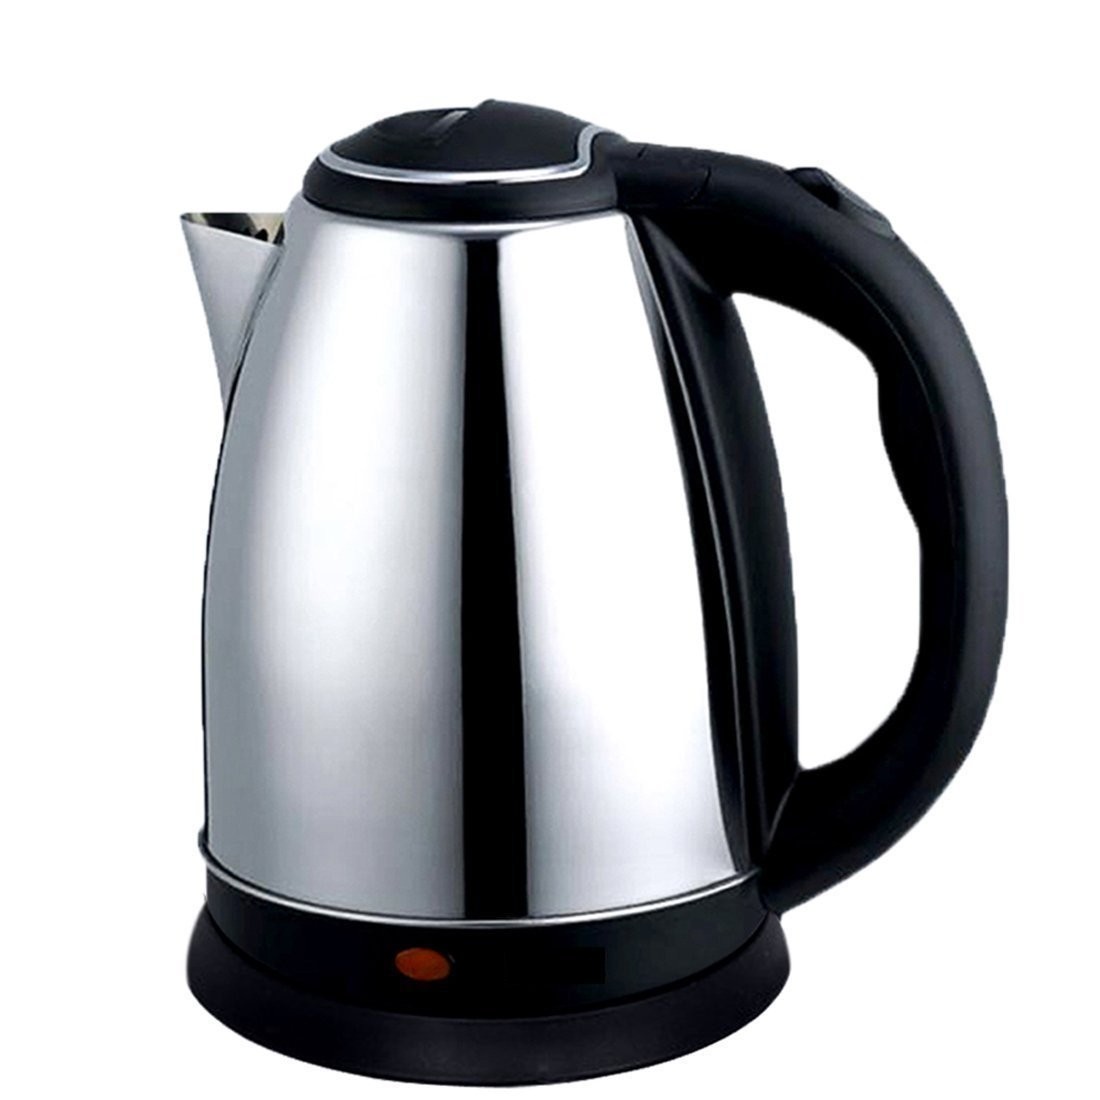 ALLY Electric Kettle 1.8 LTR, Stainless Steel (1500 Watts)